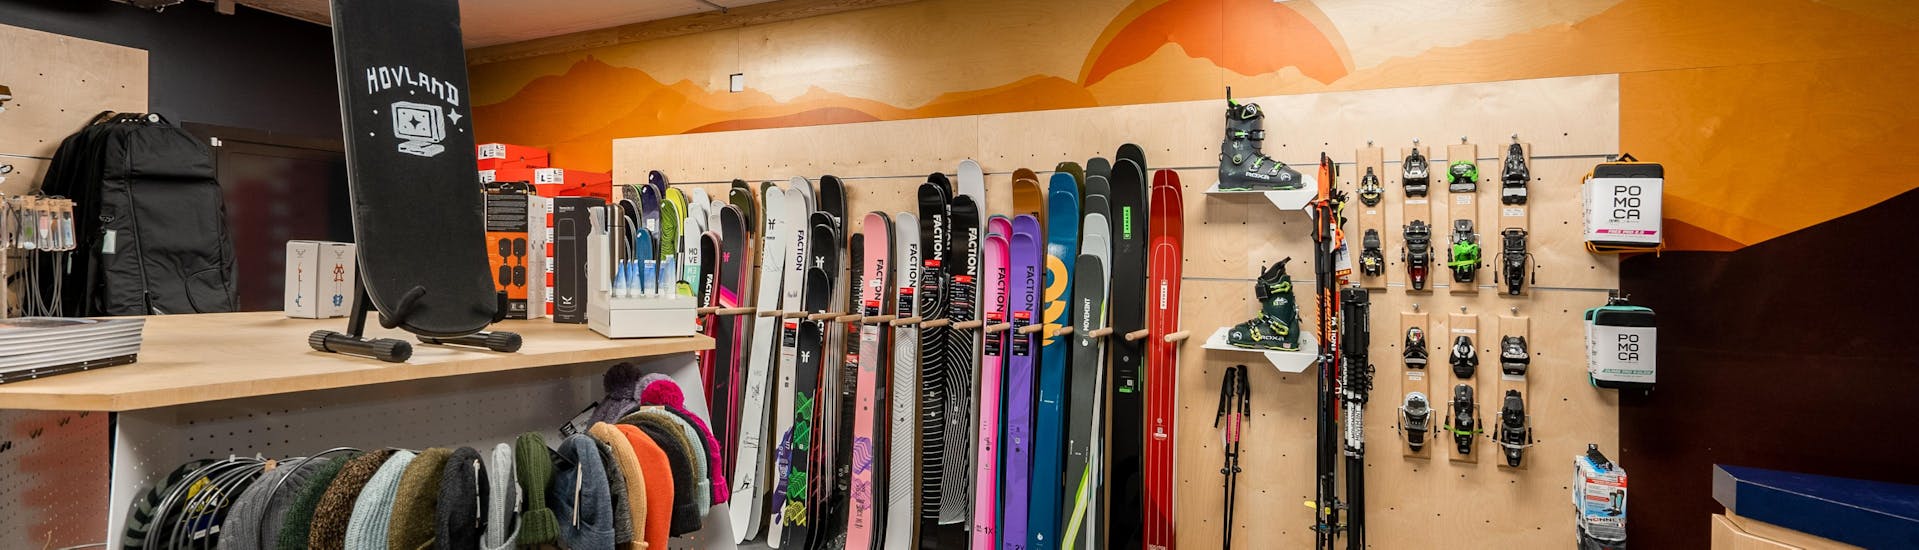 The interior of the wonderful ski and snowboard rental shop called Backside Verbier.